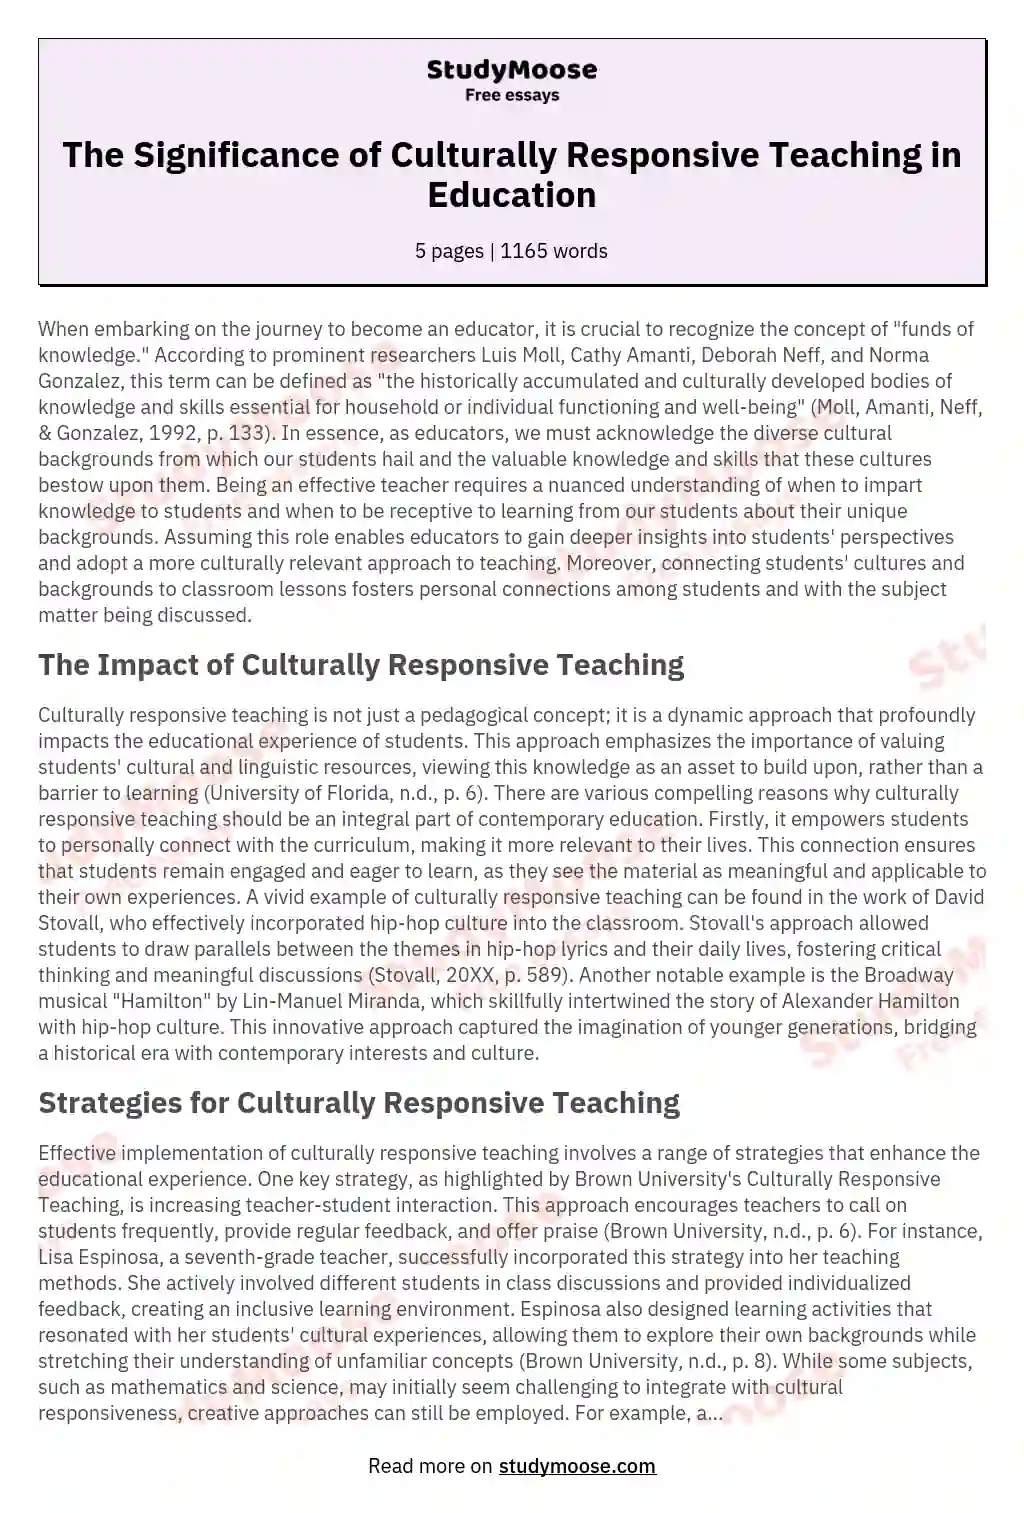 The Significance of Culturally Responsive Teaching in Education essay